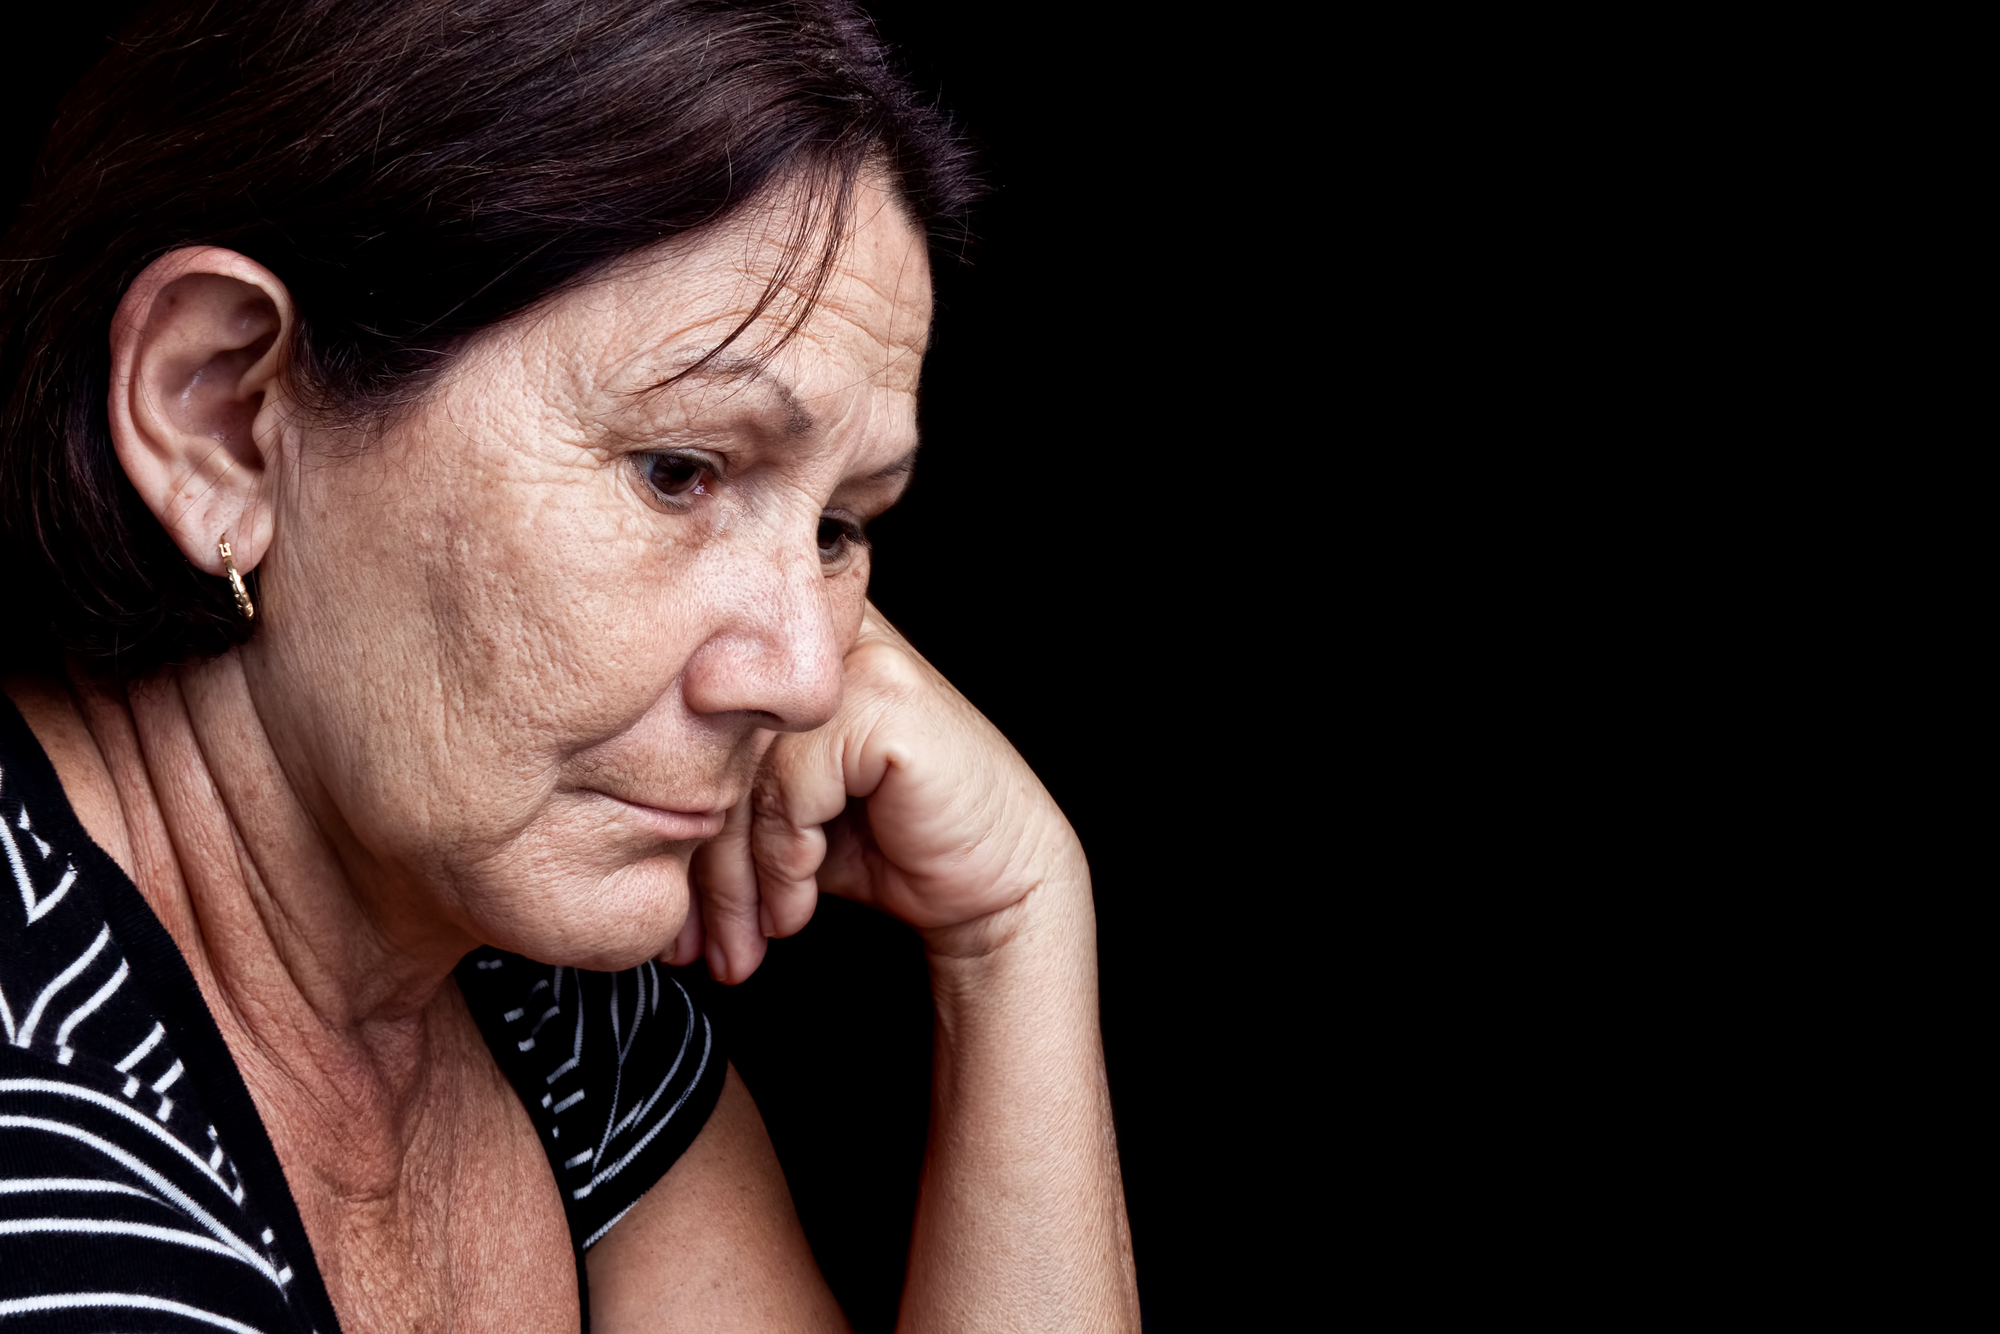 Why is Elder Abuse Increasing During the Pandemic? Find Out Here